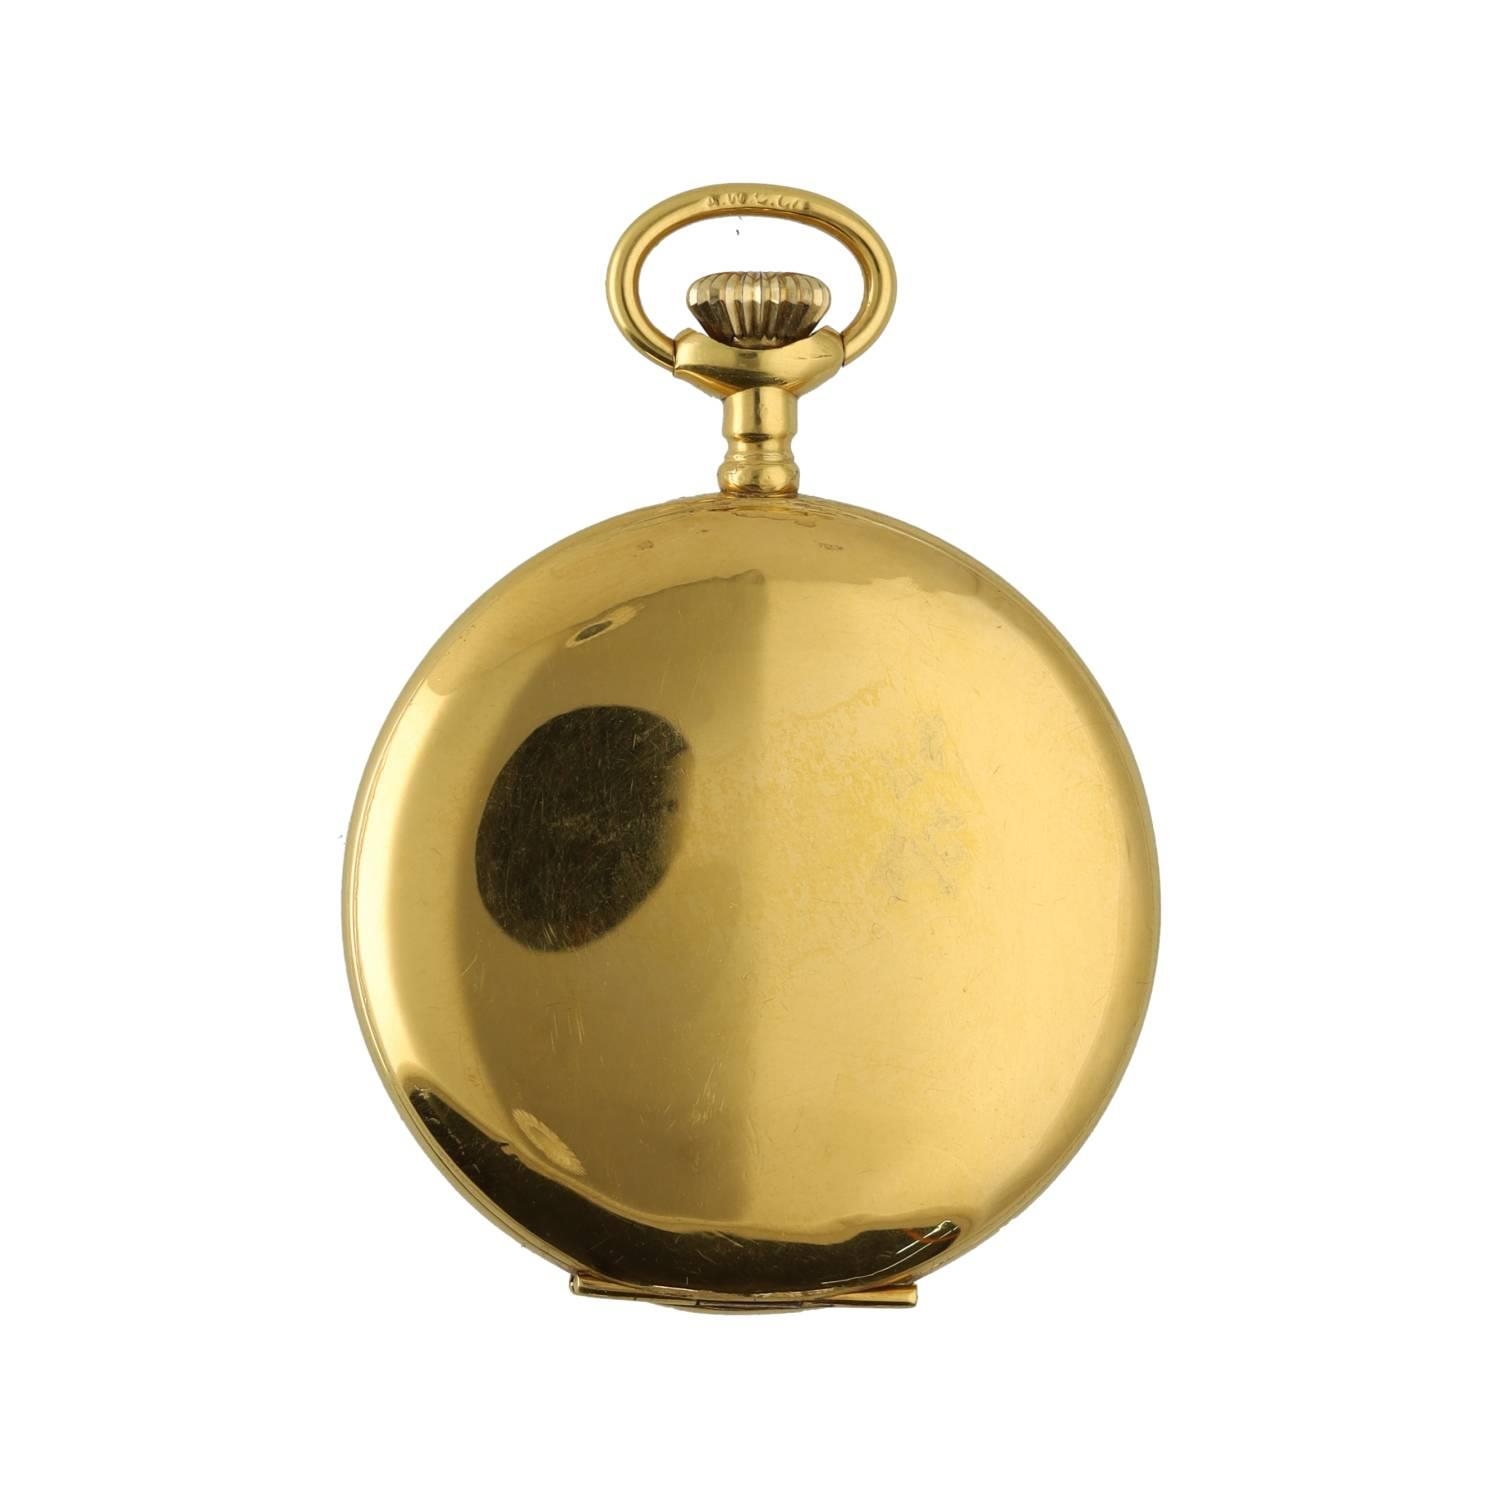 Elgin National Watch Co. 'B.W. Raymond' gold filled lever hunter pocket watch, circa 1910, serial - Image 3 of 4